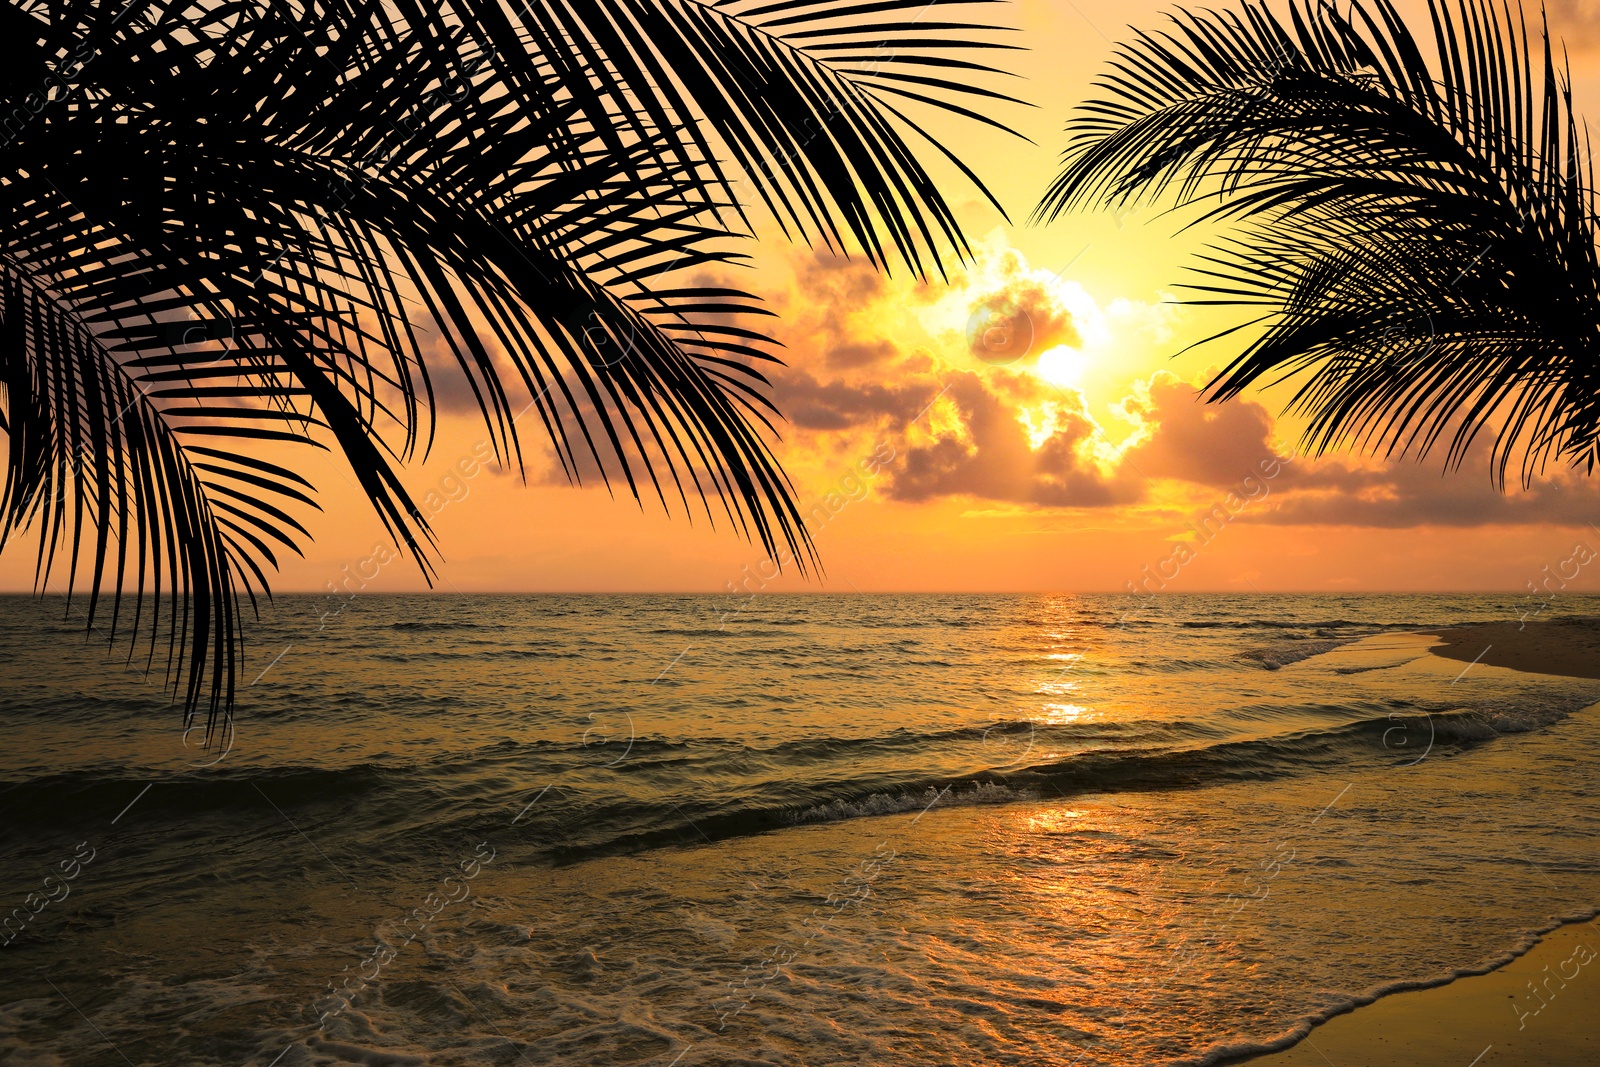 Image of Picturesque view of tropical beach with palm trees at sunset